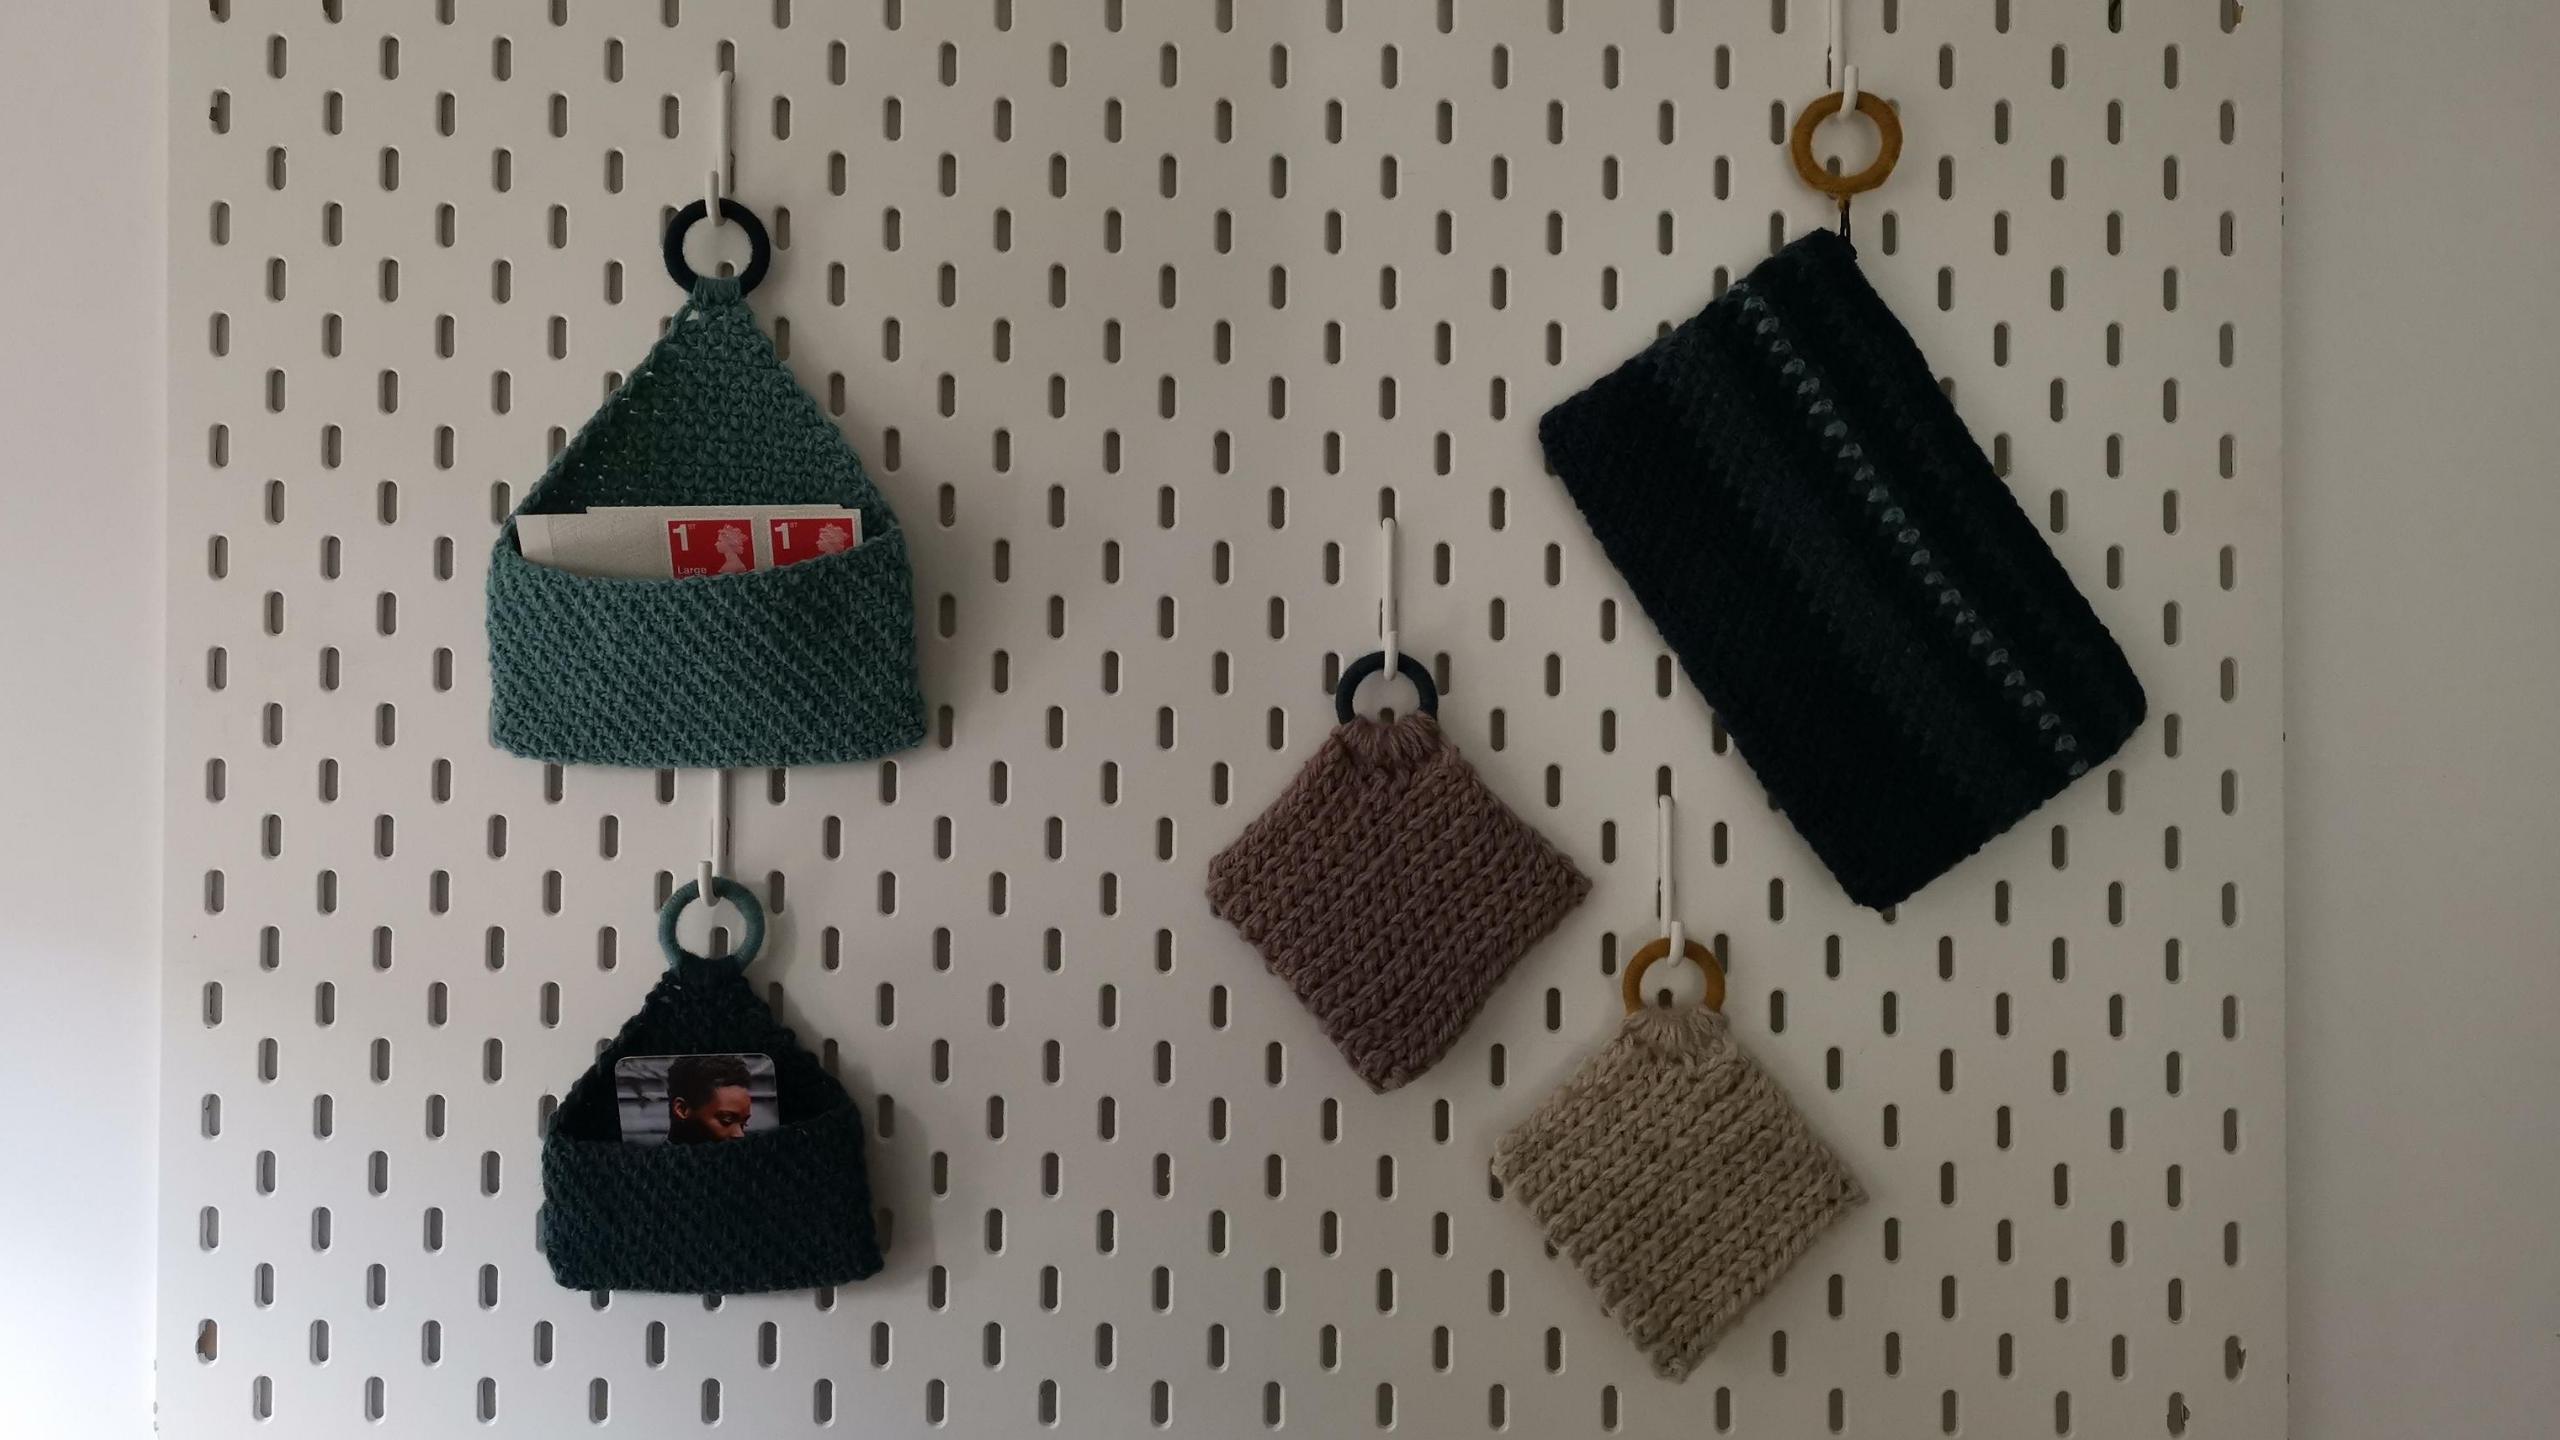 Crocheted hanging storager for stamps and business cards, a clutch and coasters are hanging from an IKEA office wall storage panel.